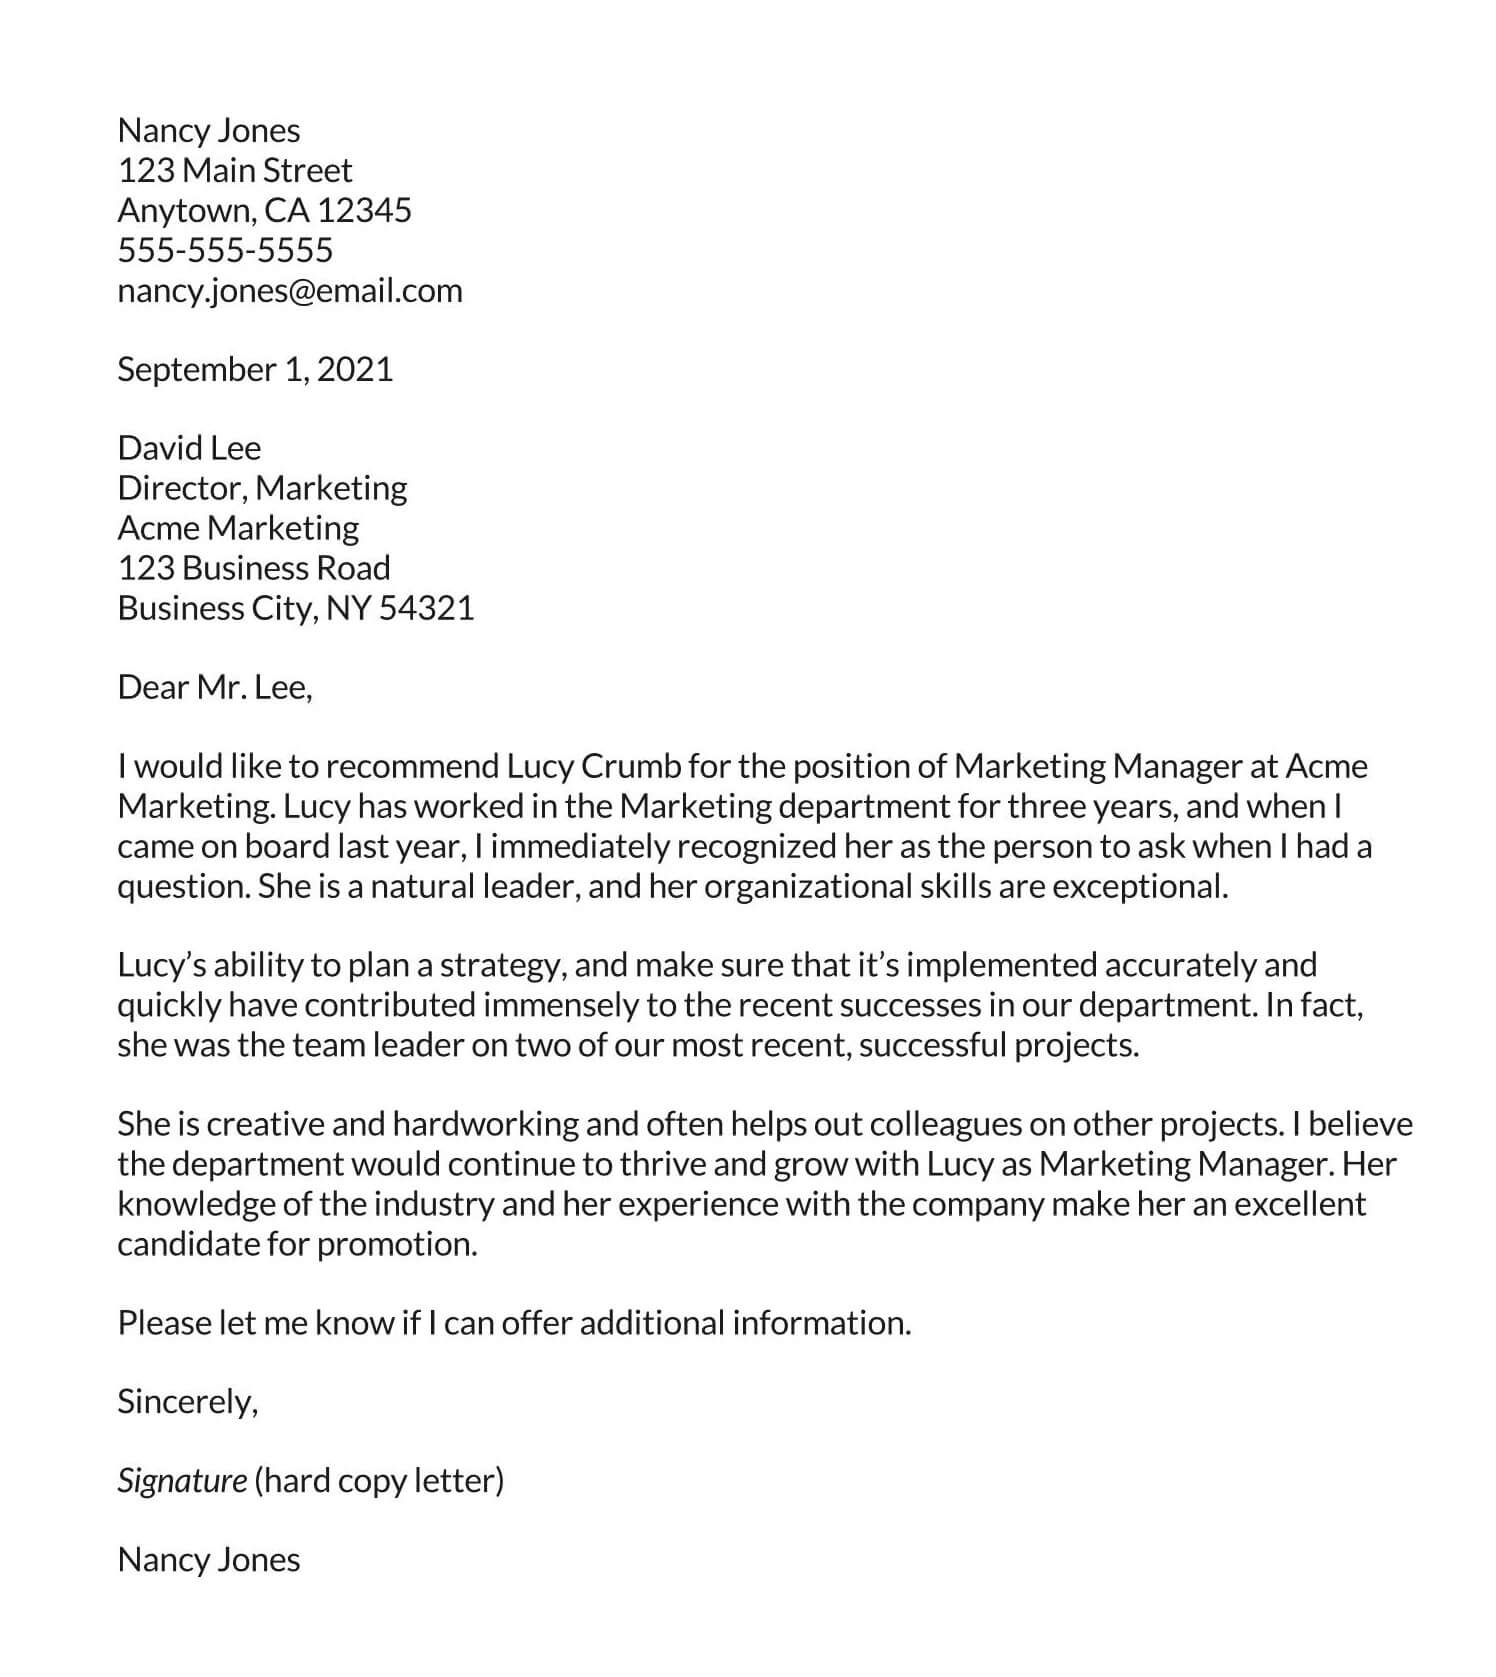 Reference Letter for Promotion - Free Download